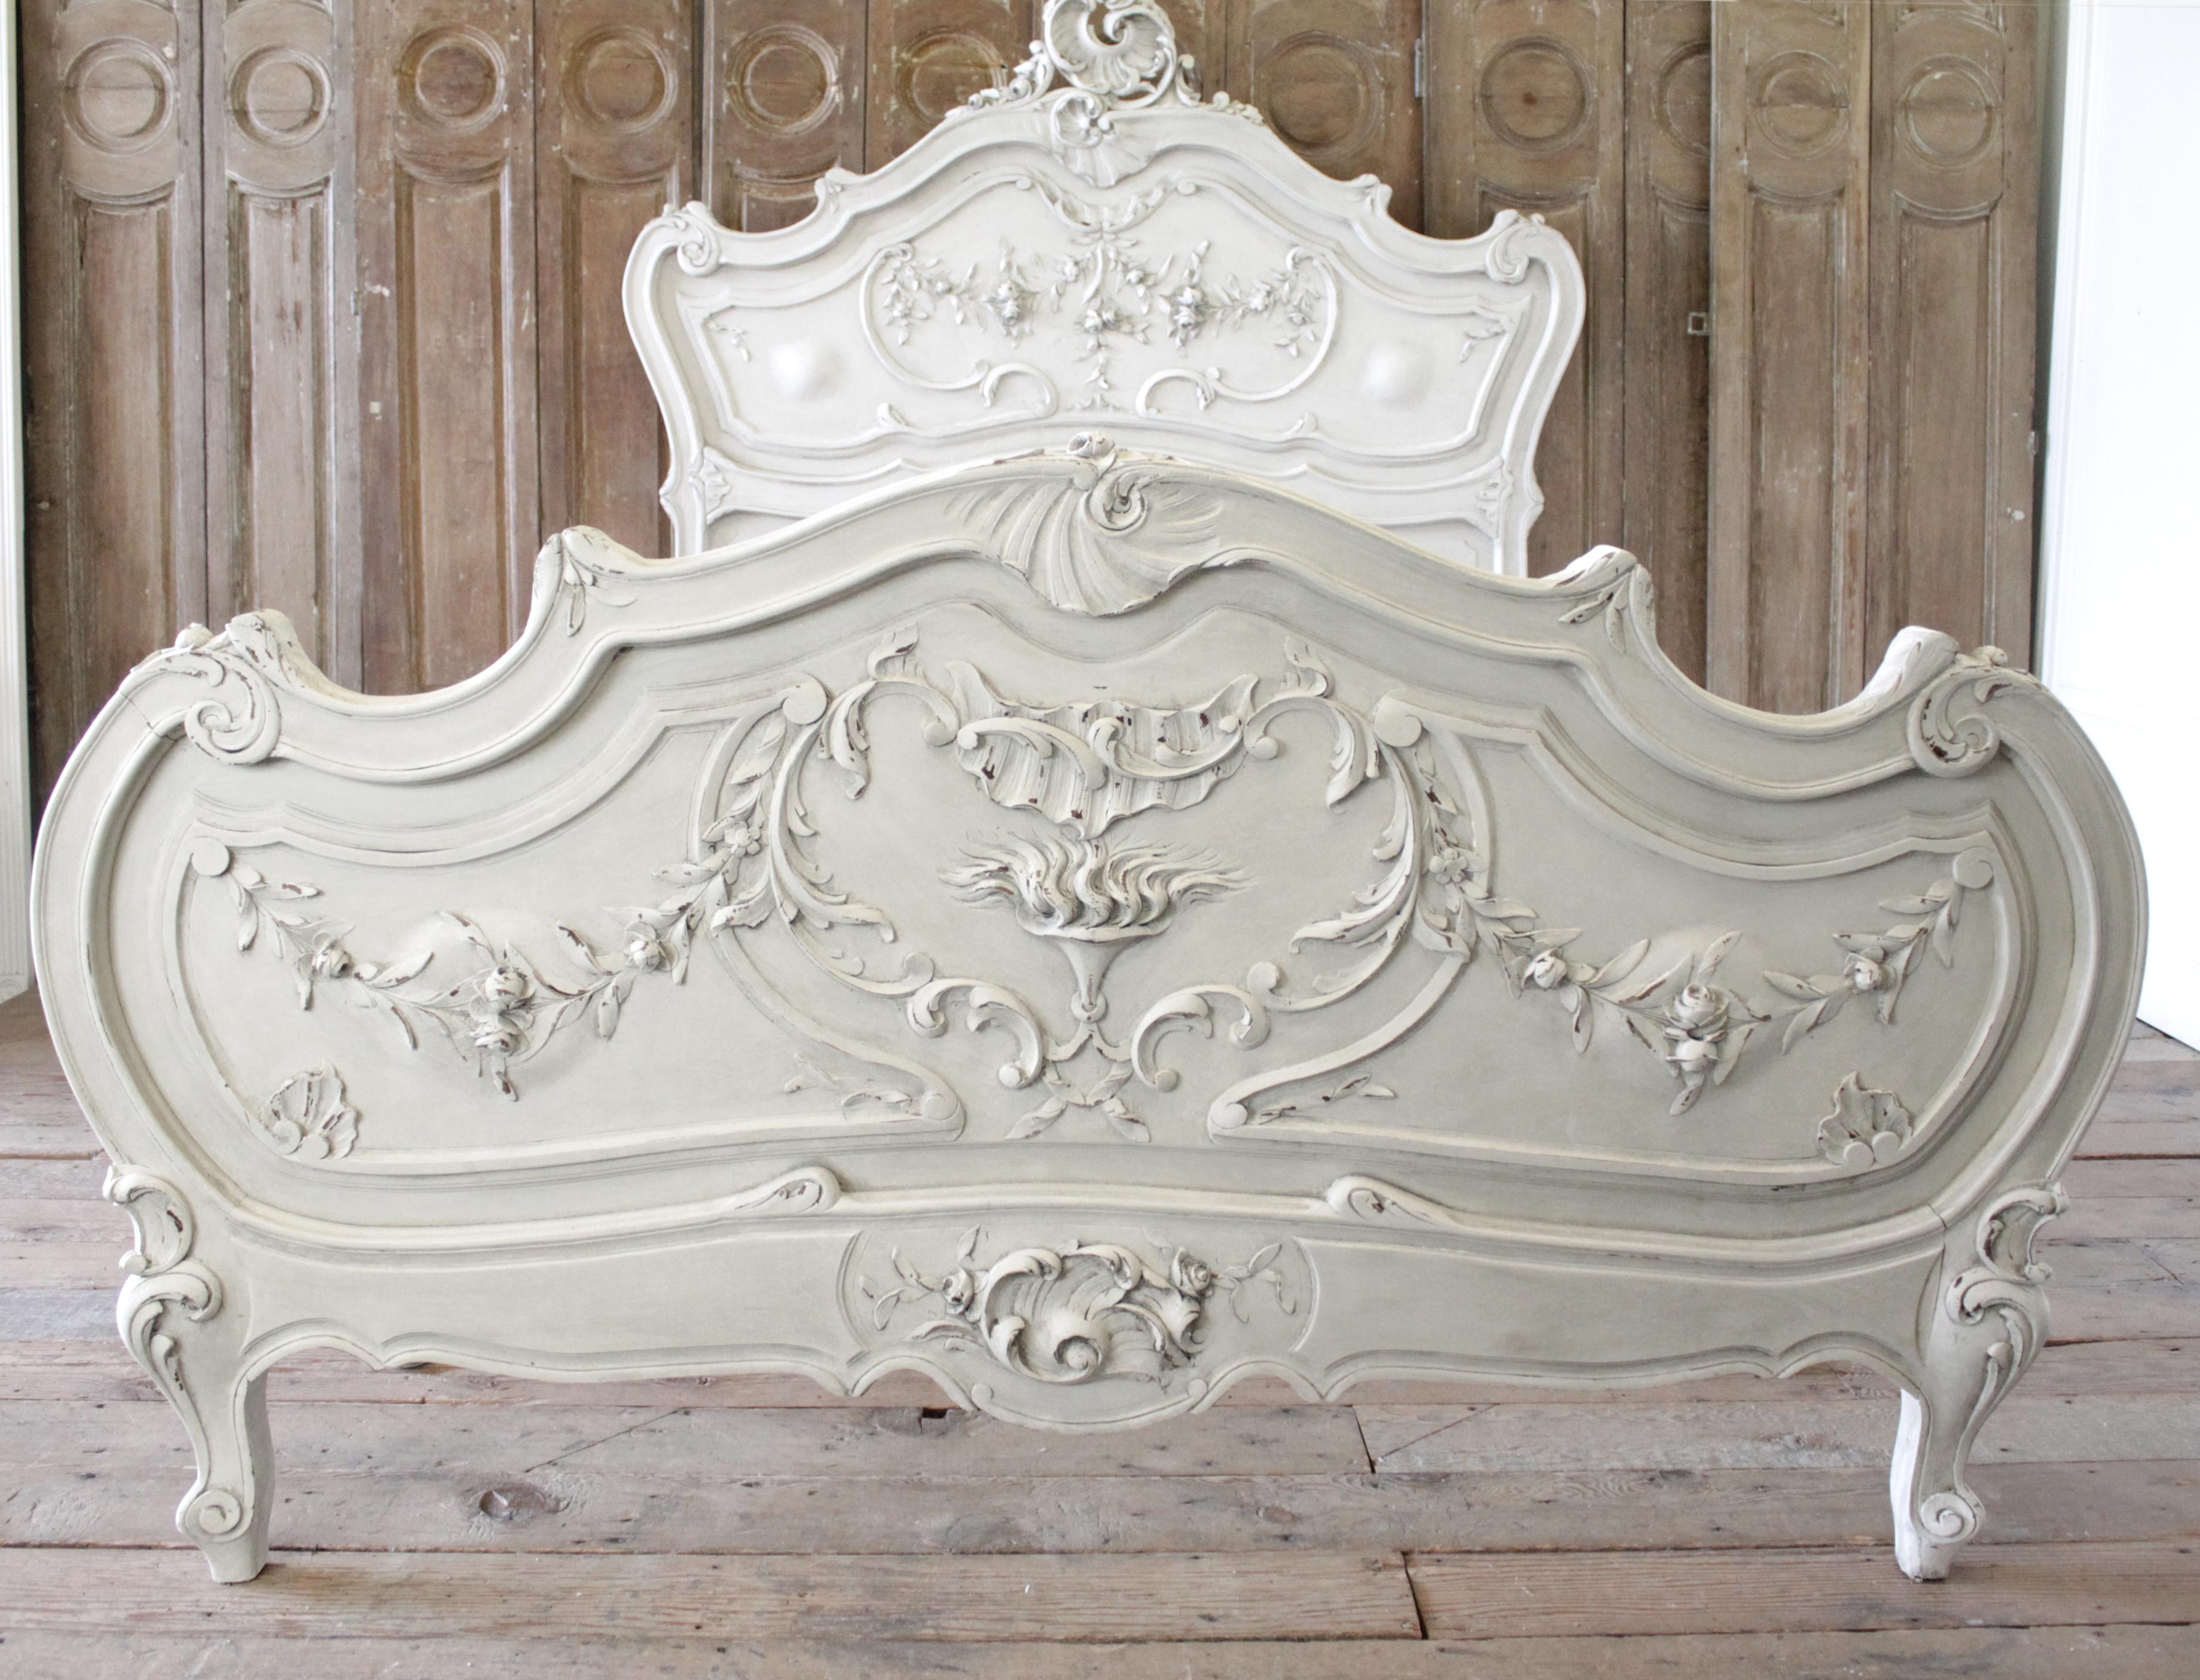 Antique Louis XV style painted French bed full size or Queen size
Beautifully painted in a soft oyster white finish, with subtle distressed edges, and finish with an antique patina. The headboard has a large carved cartouche, with heavy carved rose